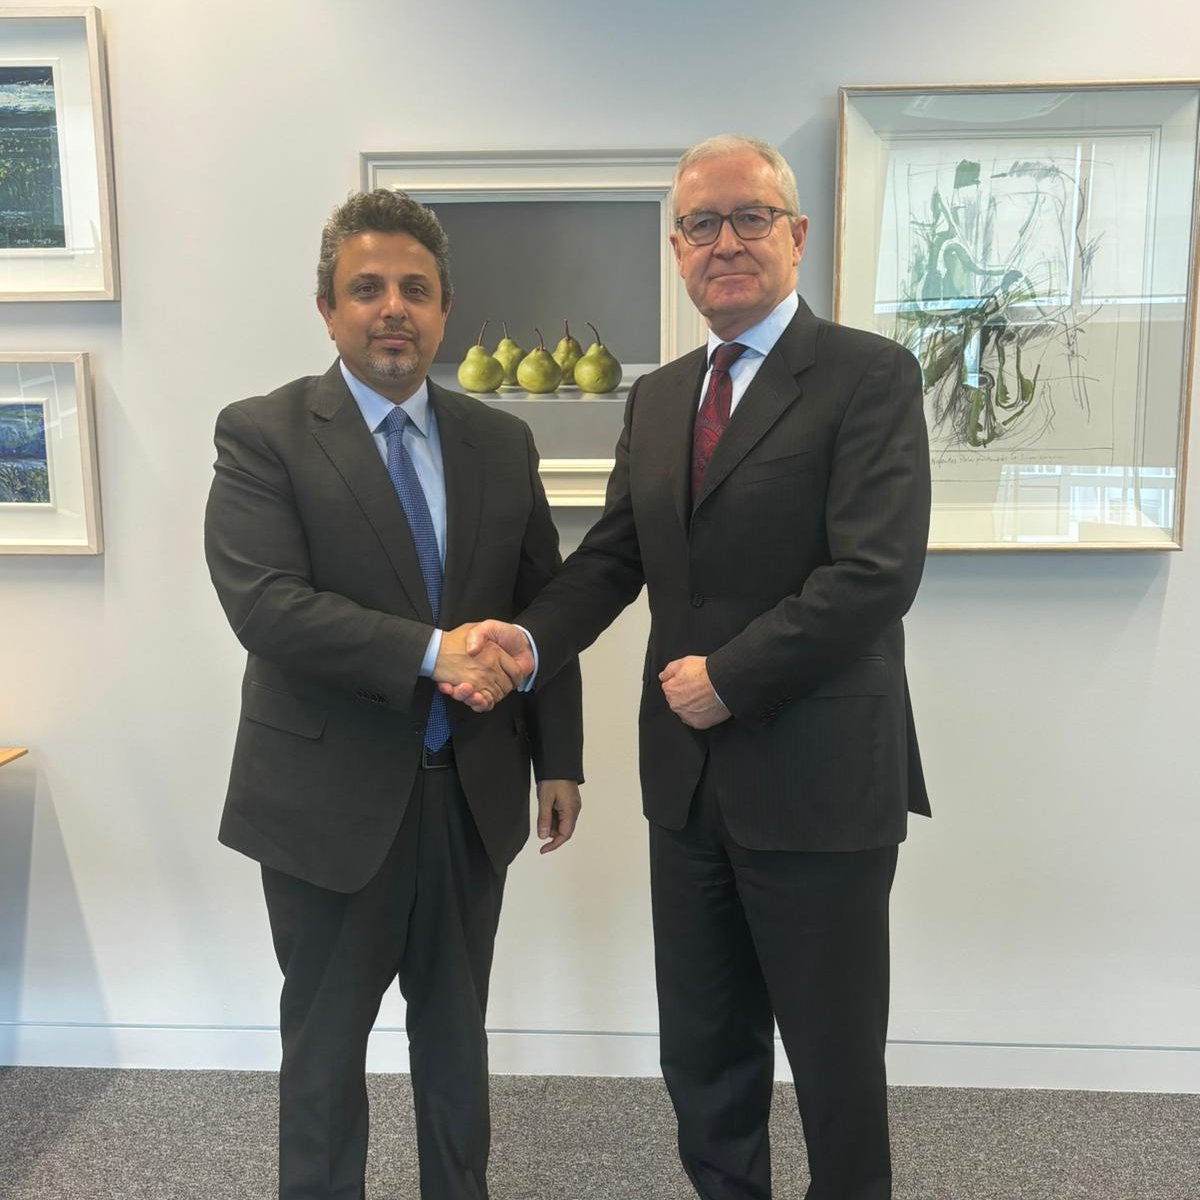 A pleasure to meet @ManarMDabbas, Ambassador of the Hashemite Kingdom of Jordan to the UK, yesterday to discuss our research, education, entrepreneurship, and the valued contributions of our Jordanian students.